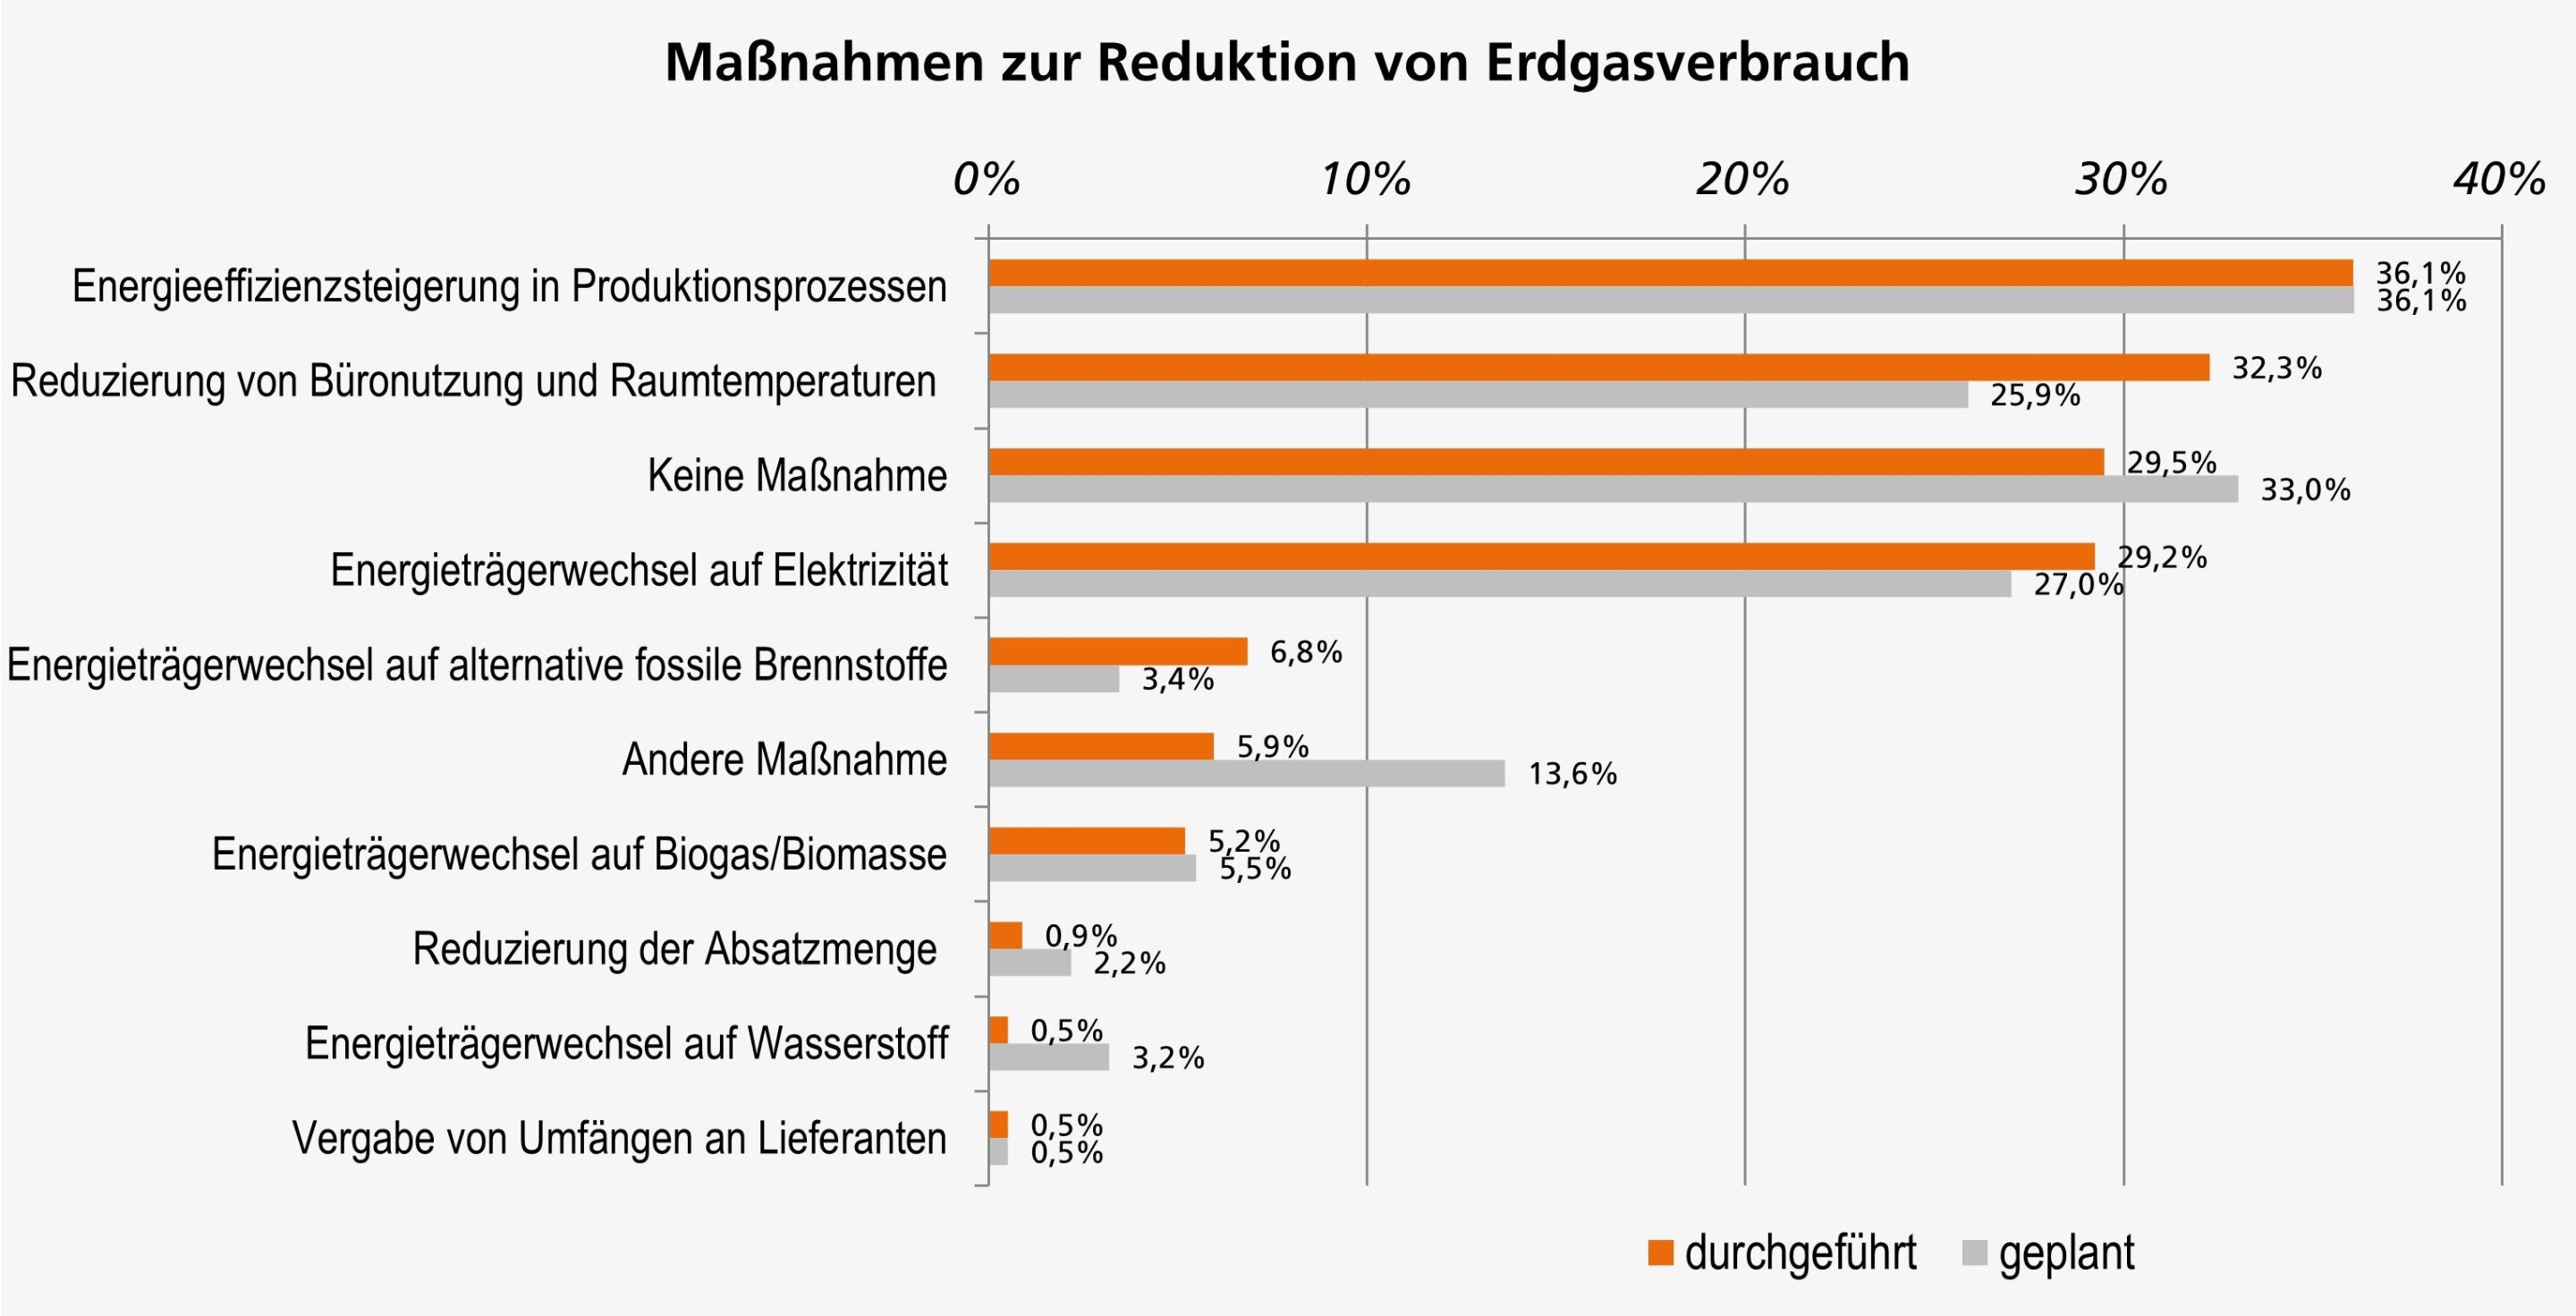 #Energy efficiency it the most popular way to save natural gas, finds survey of German companies